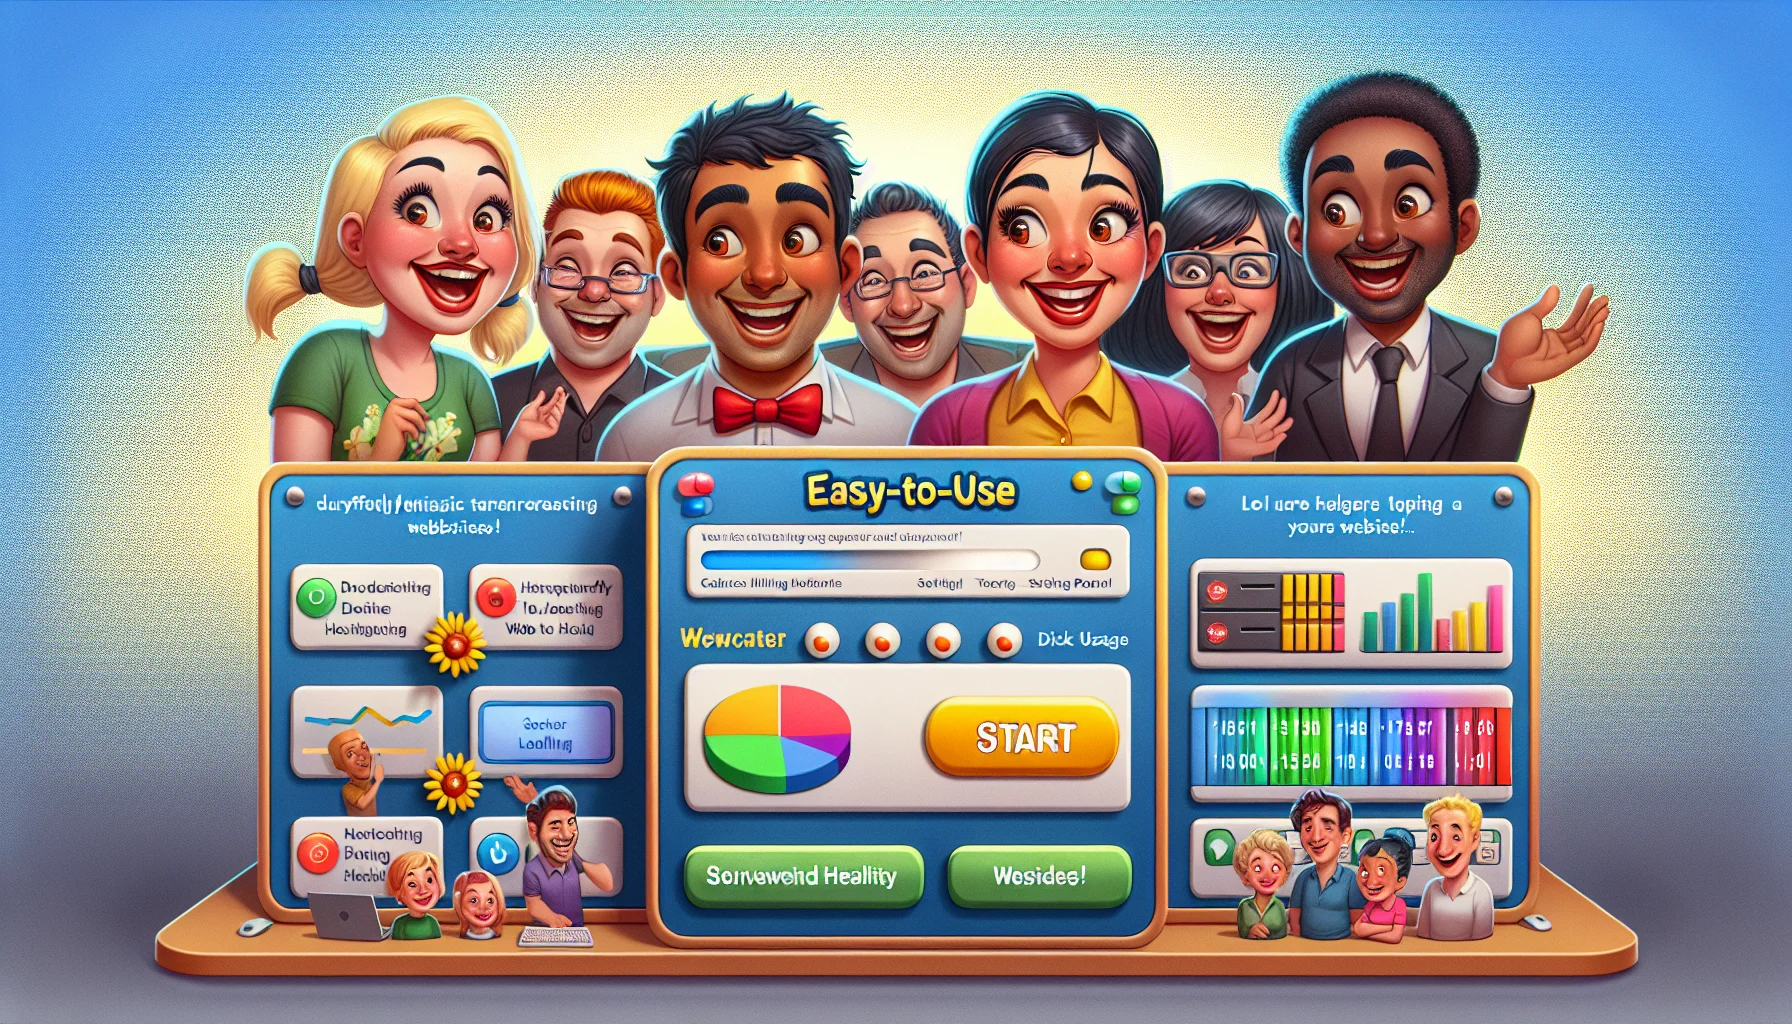 Create a humorously enticing scenario of an easy-to-use web hosting control panel. The image should convey a playfully yet hyper-realistic portrayal of the interface's user-friendliness, where the tabs and icons are joyfully animated characters helping a diverse group of users. The users should include a Caucasian male software engineer, a Hispanic female entrepreneur running her own business, and a Black male teacher incorporating the use of websites in his pedagogy. The control panel should have a big inviting 'start' button along with various widgets simulating server health, disk usage, and other common web hosting parameters.